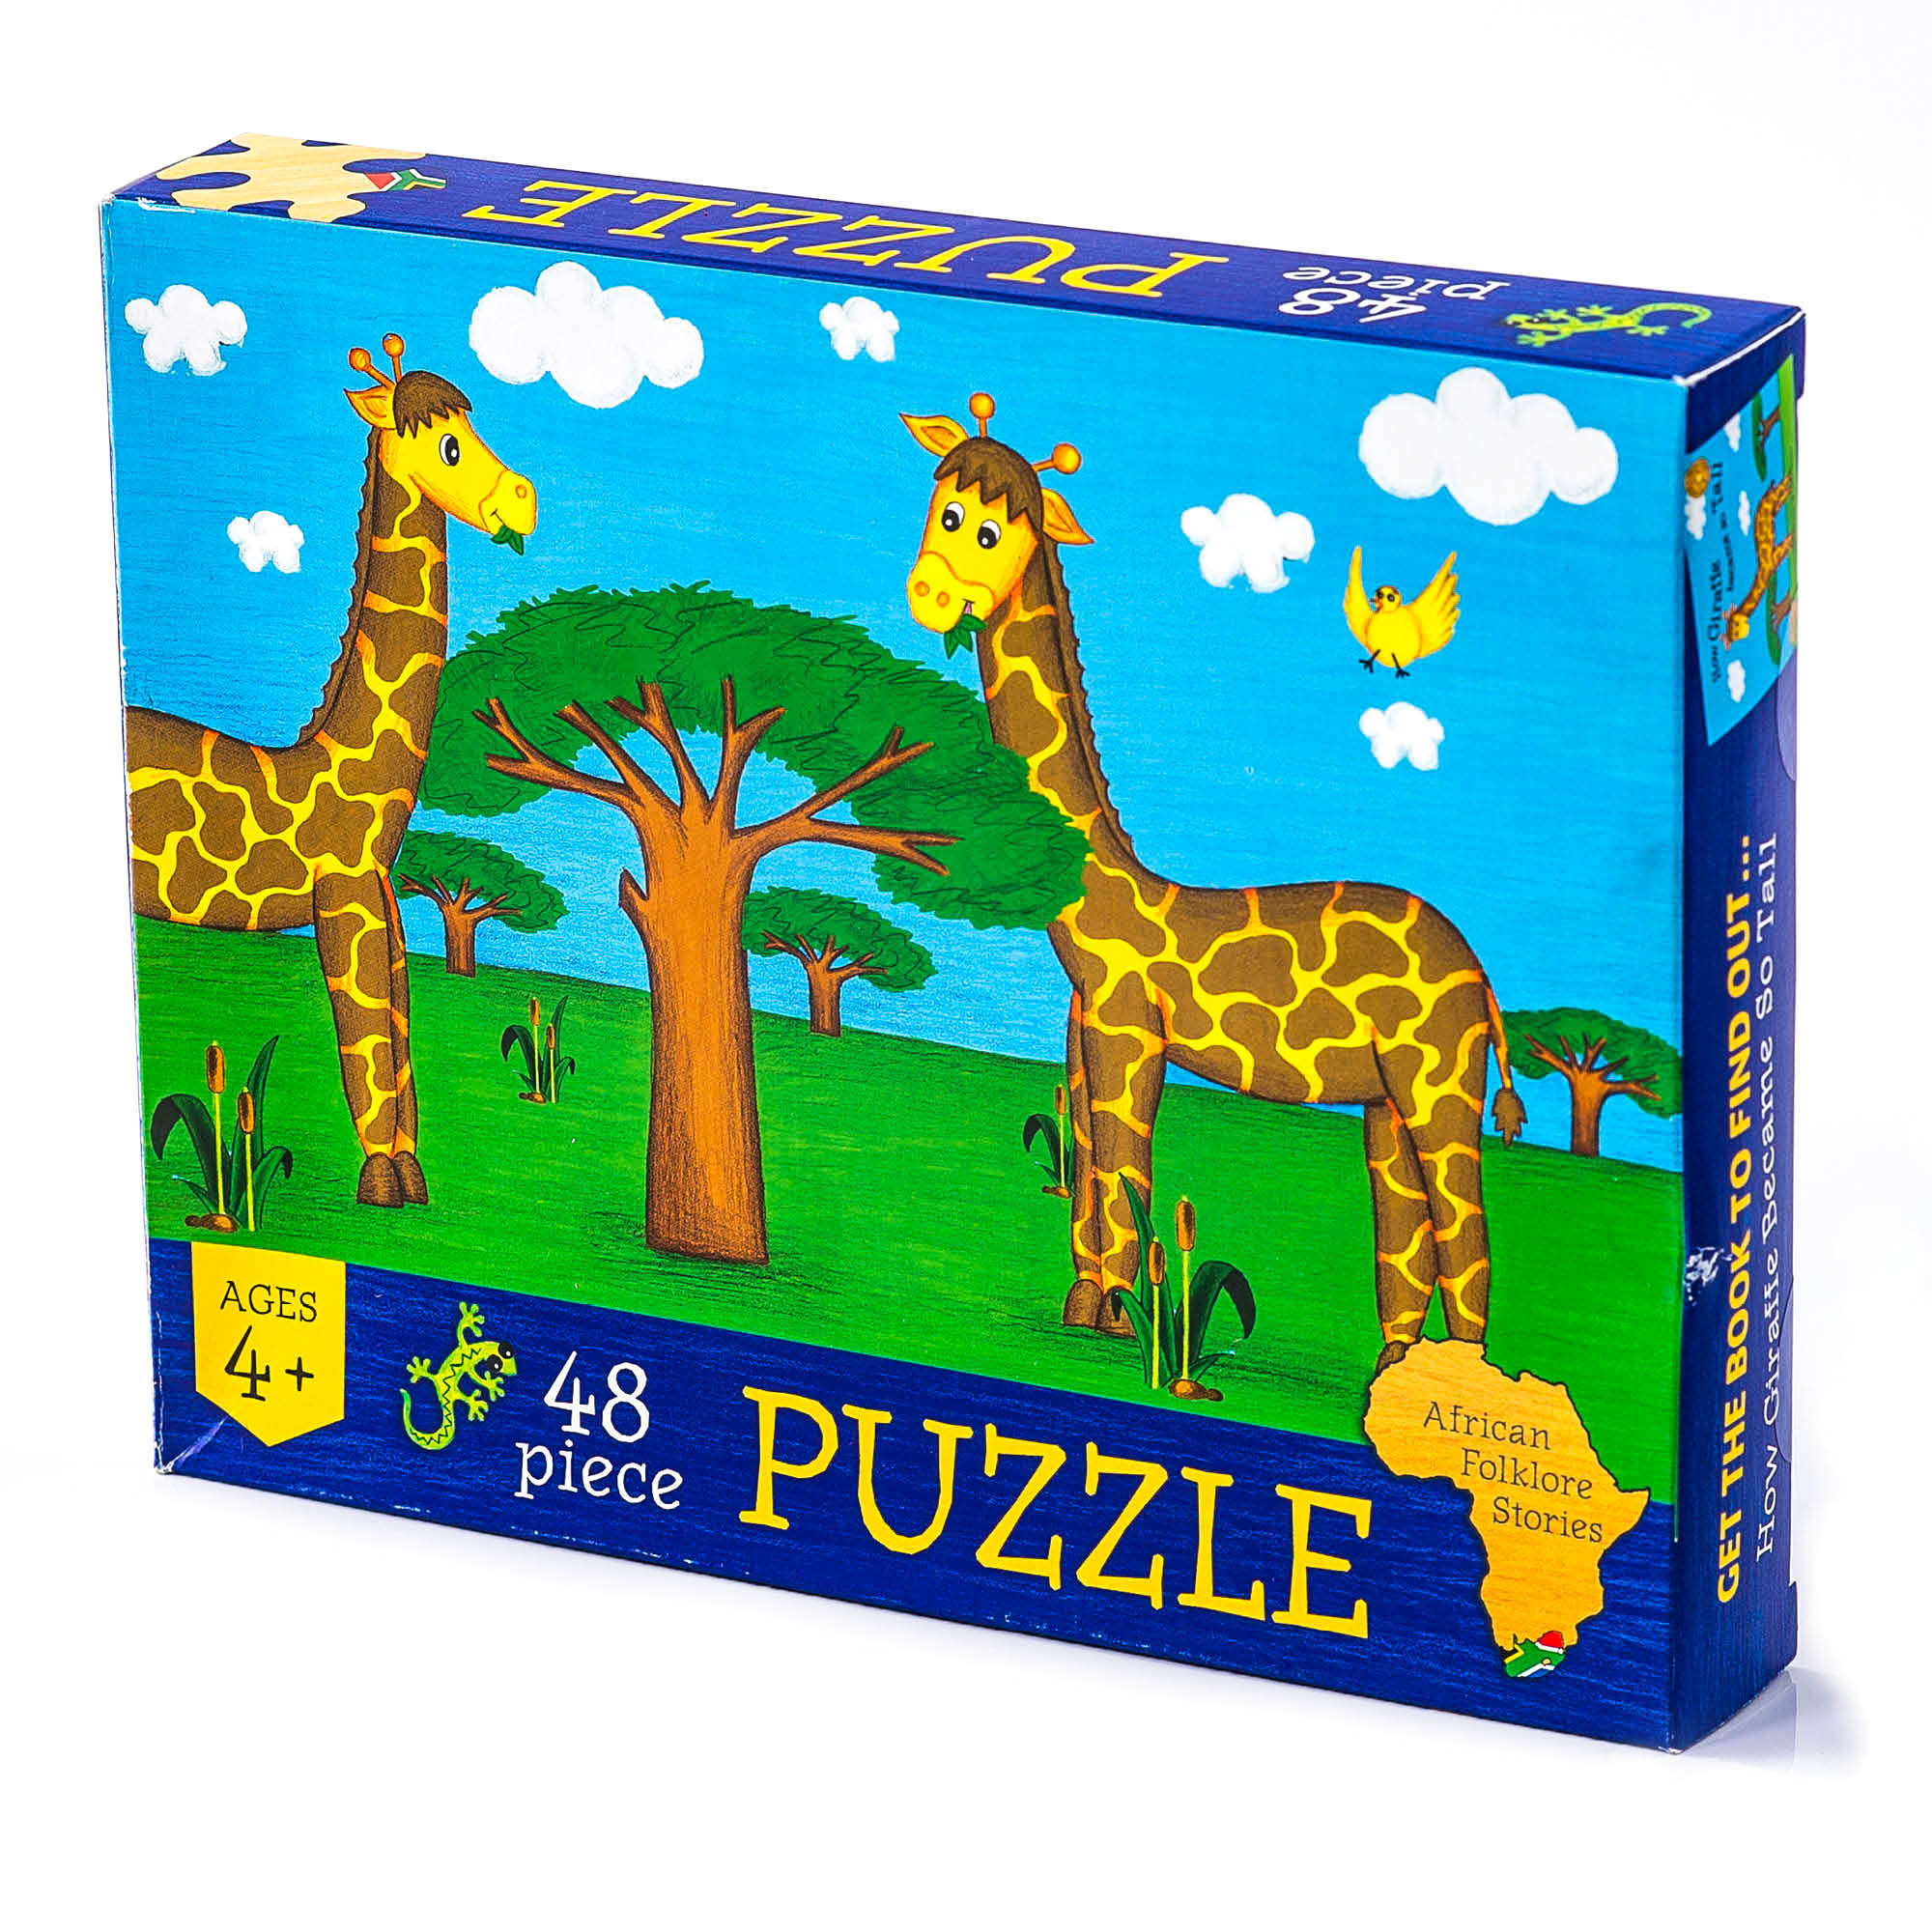 African Folklore Stories - Giraffe Puzzle